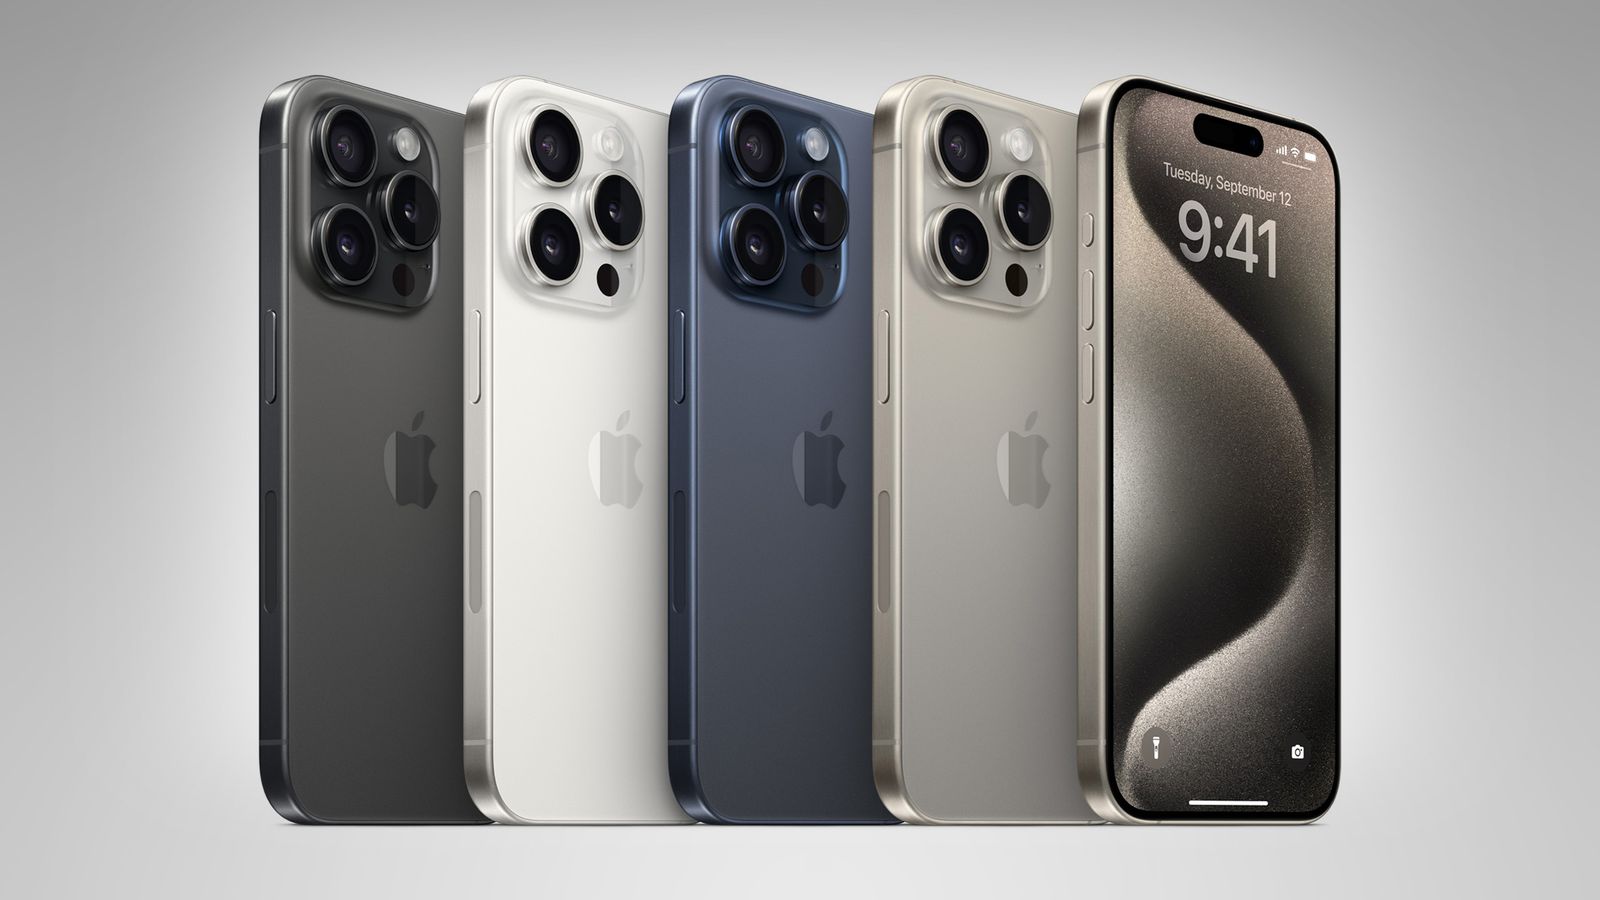 https://images.macrumors.com/t/mys29Yl7NPBoGkfKblTjHkHh6tY=/1600x0/article-new/2023/09/iPhone-15-Pro-Lineup-Feature-White.jpg